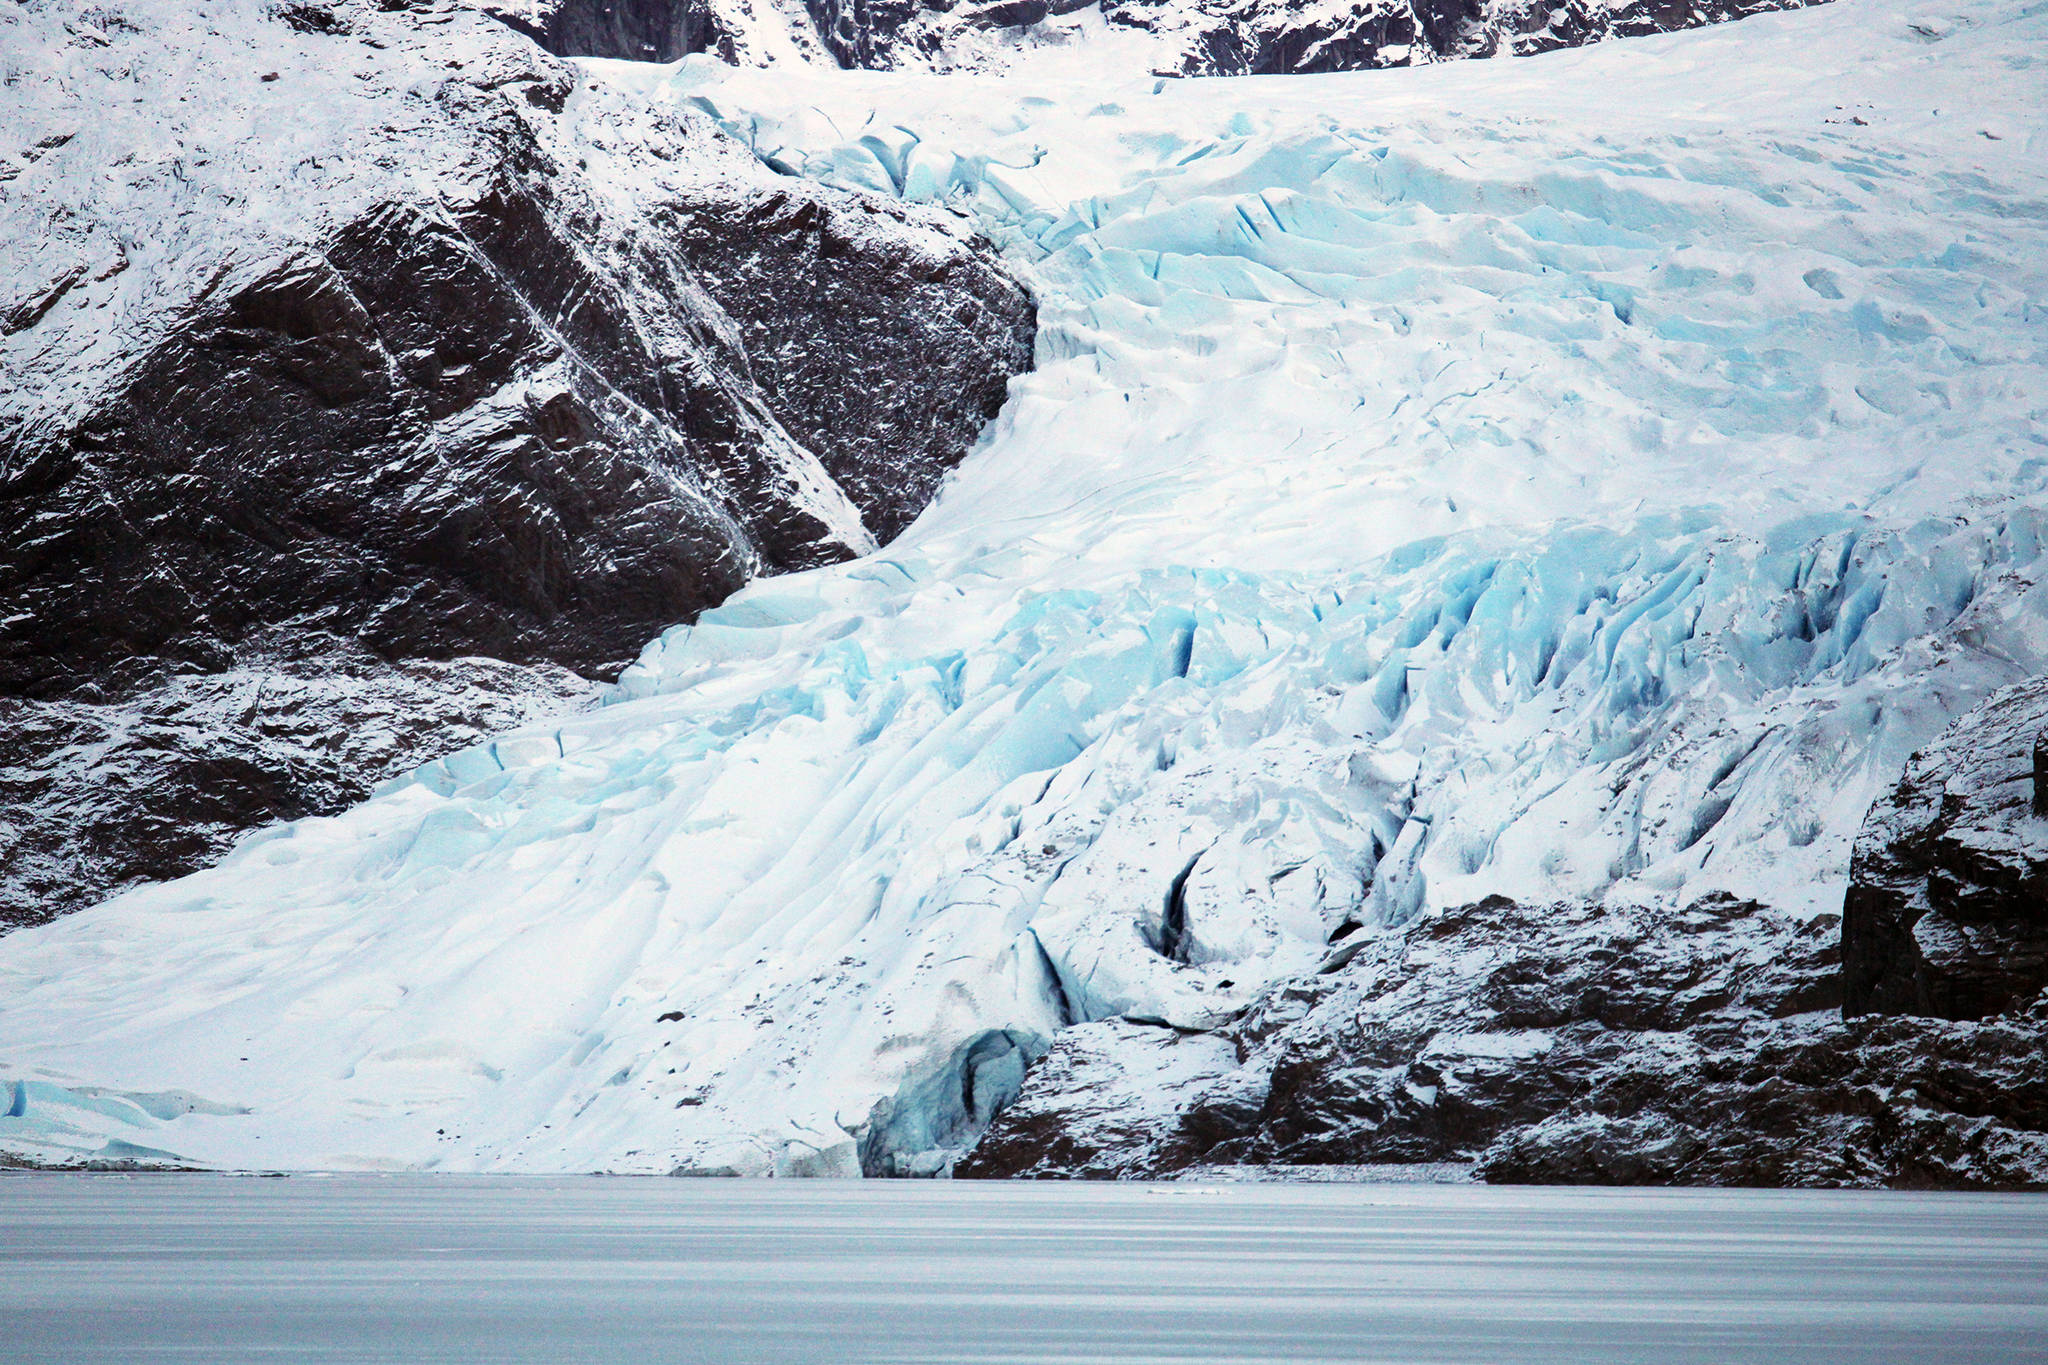 The Mendenhall Glacier is devoid of tourists in this January 2021 photo. (Ben Hohenstatt / Juneau Empire)